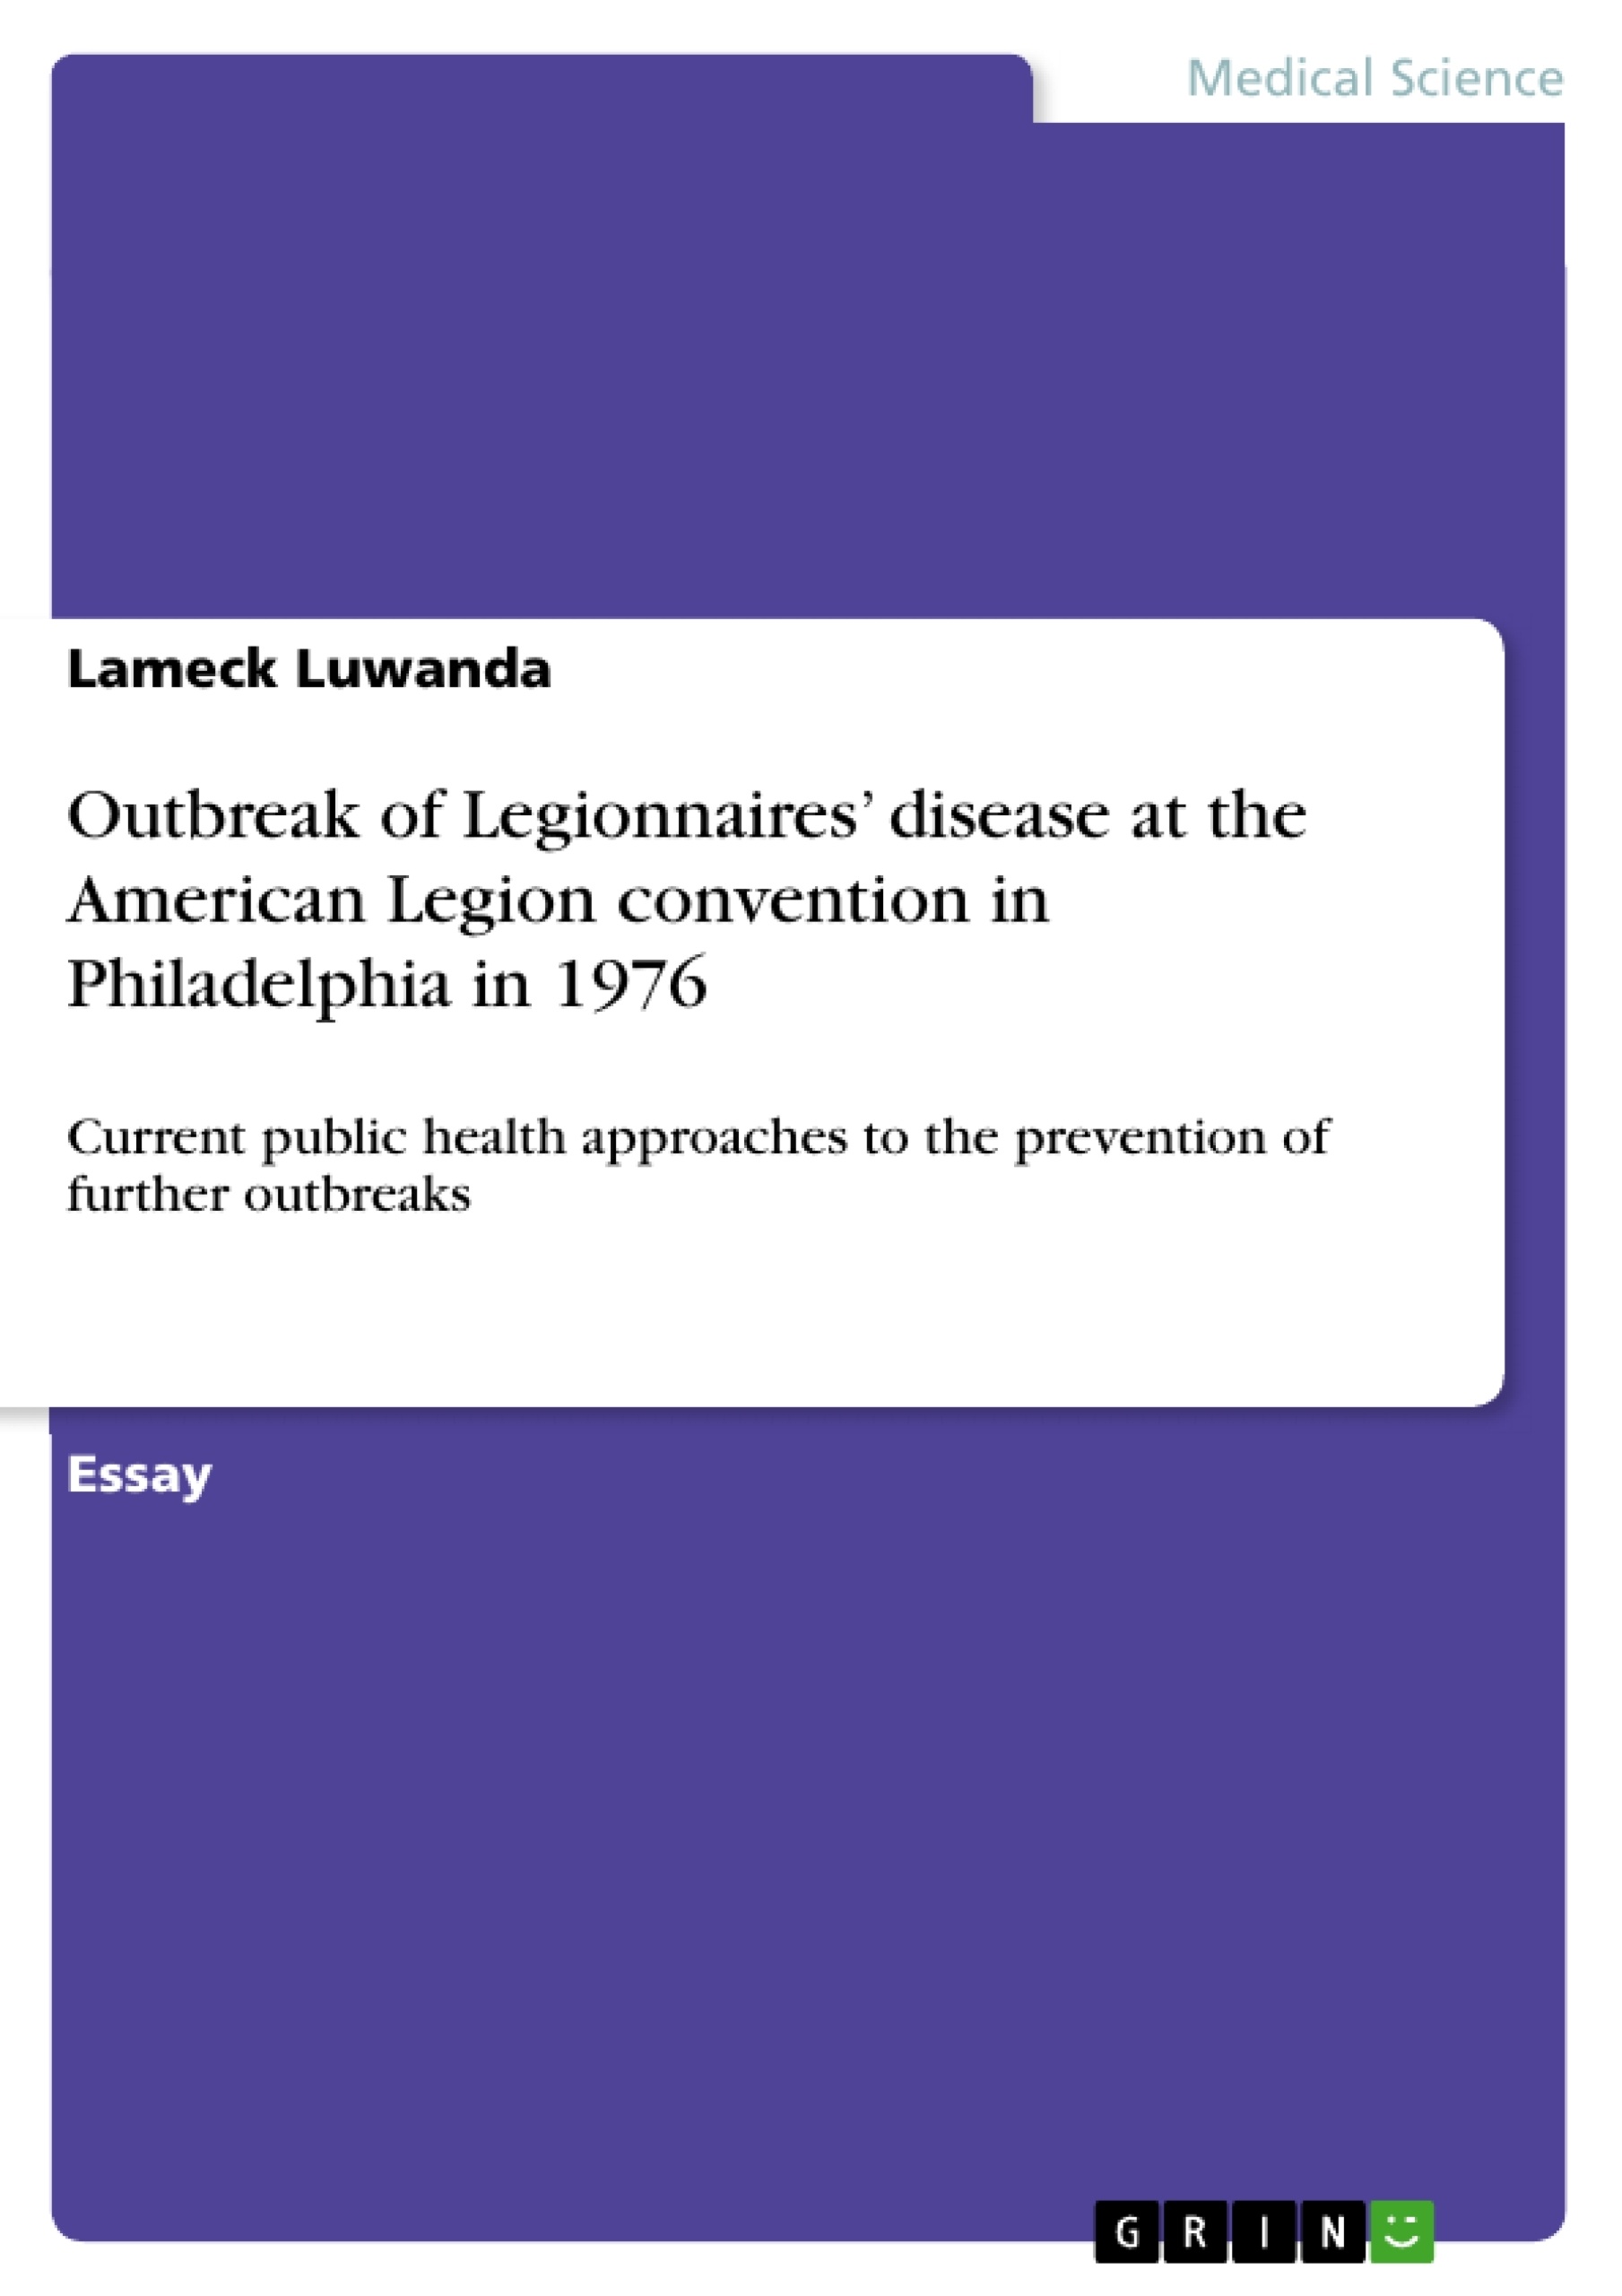 Titre: Outbreak of Legionnaires’ disease at the American Legion convention in Philadelphia in 1976